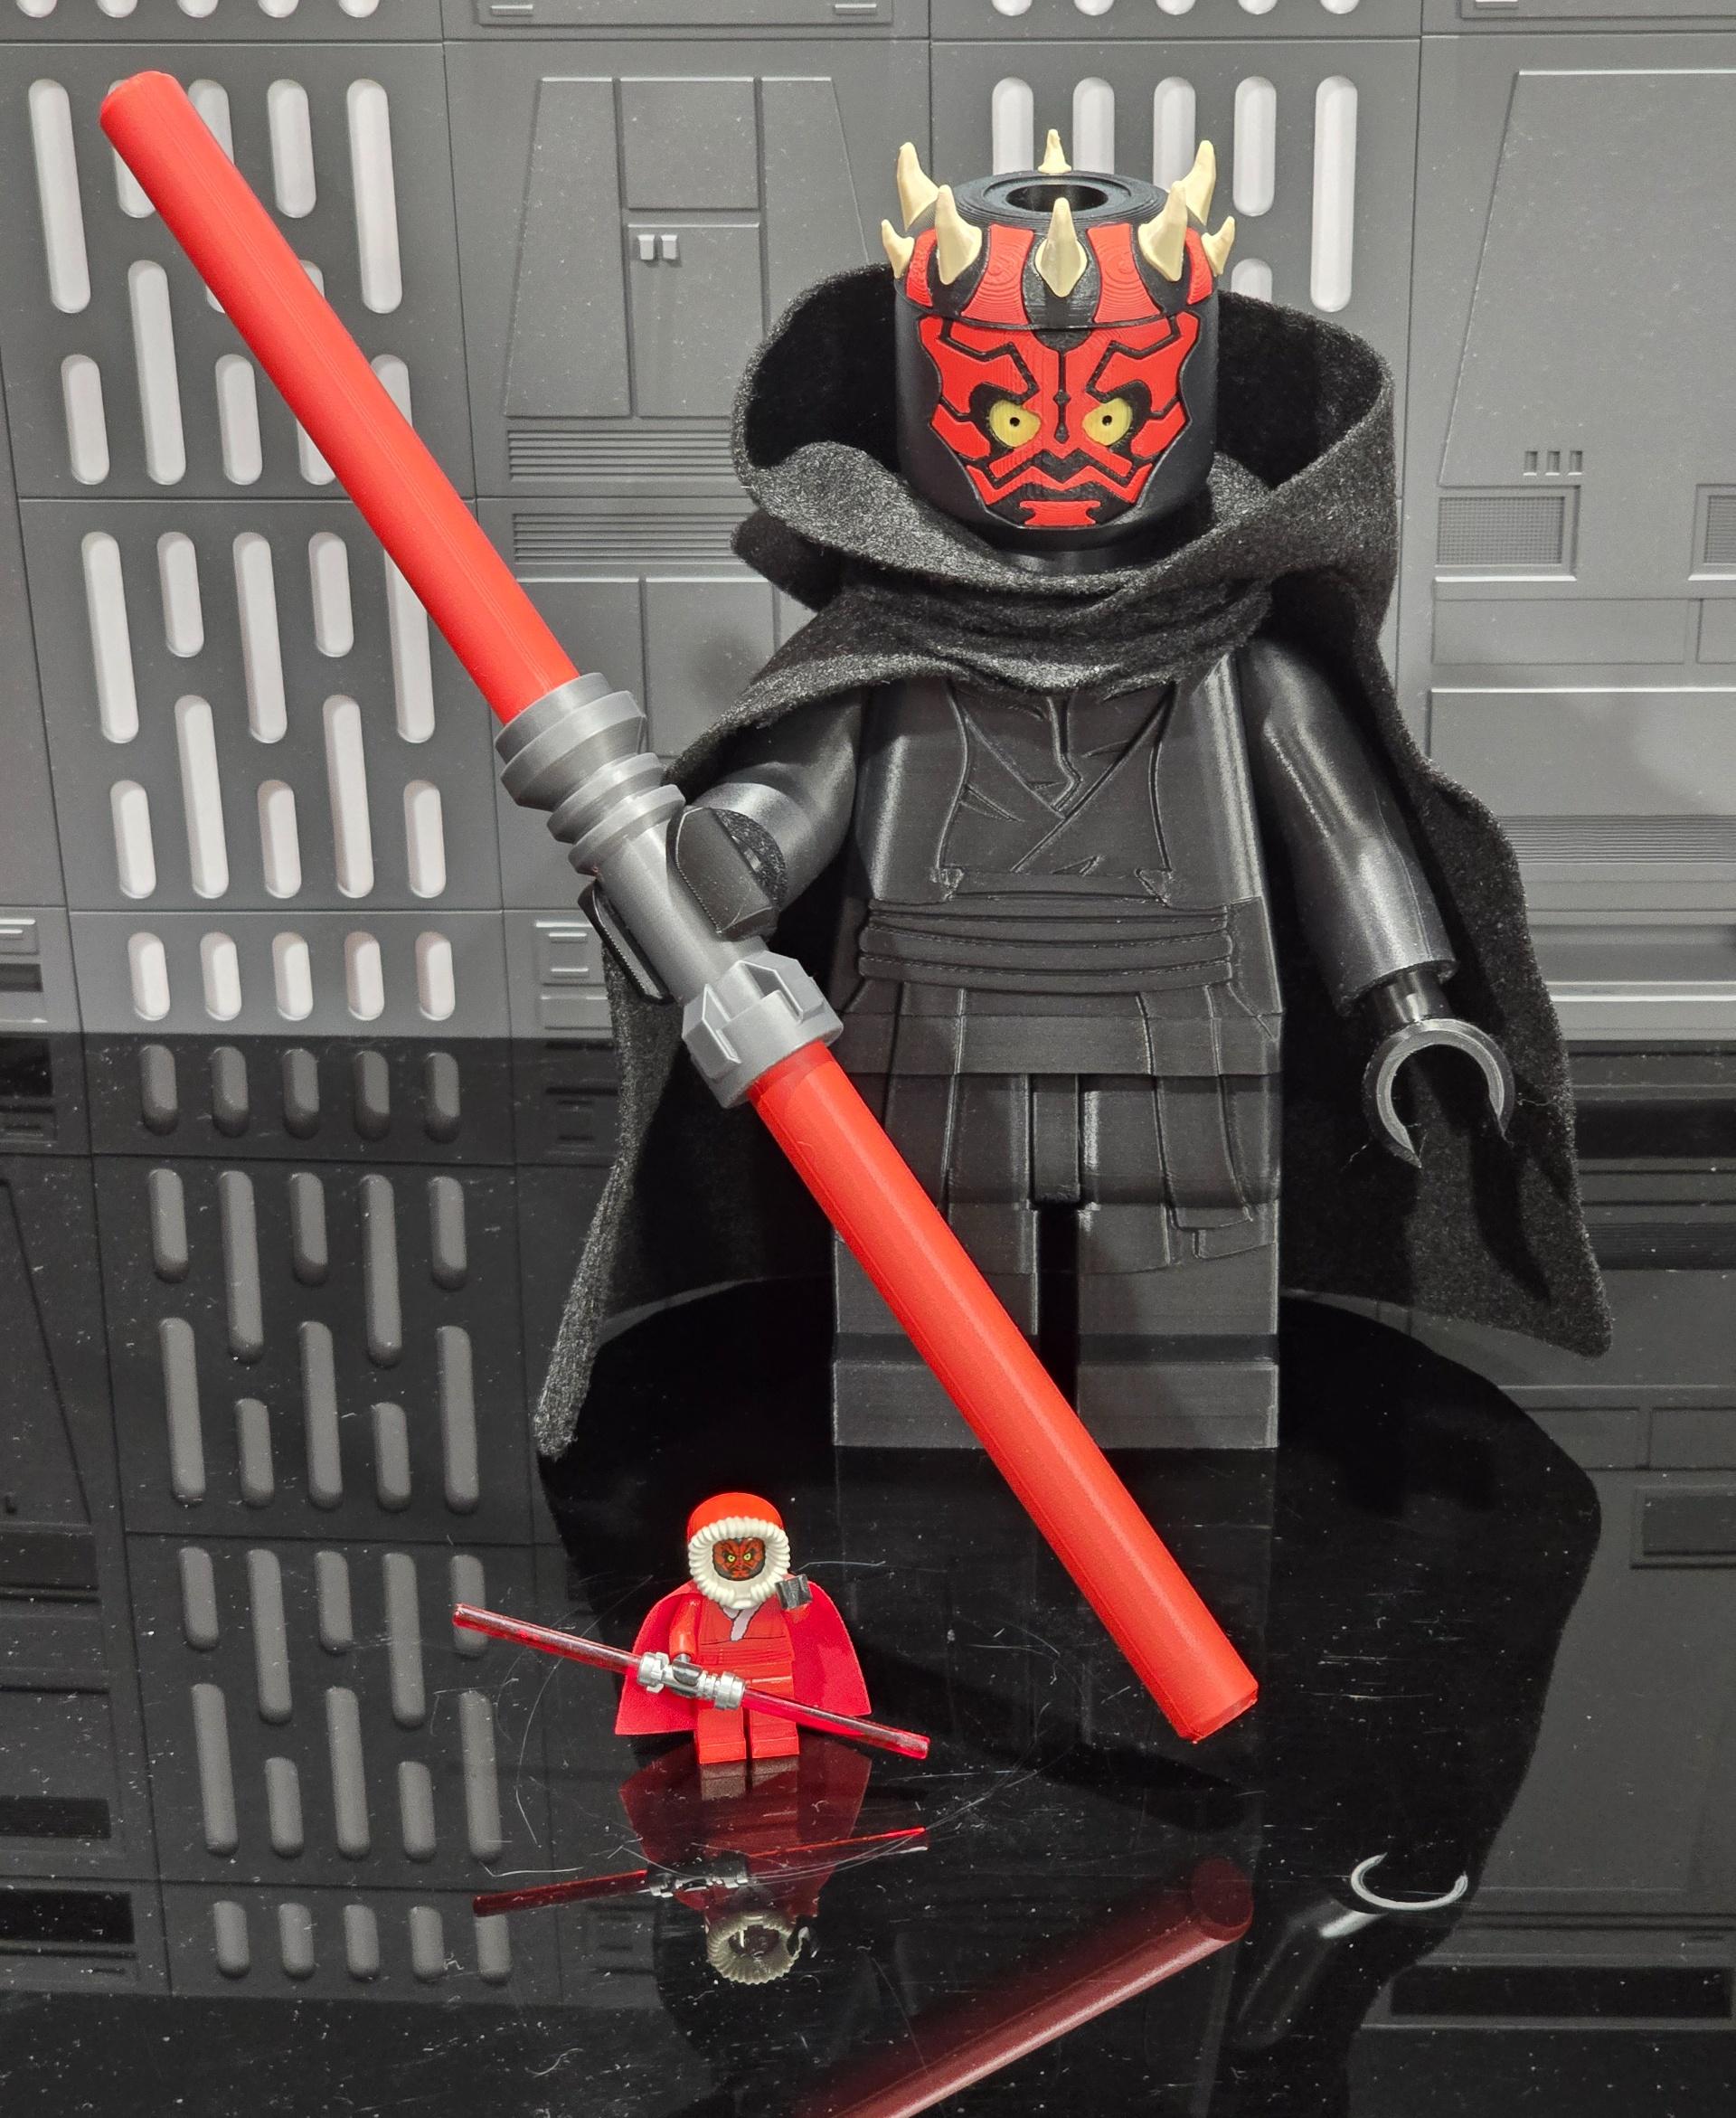 Darth Maul (6:1 LEGO-inspired brick figure, NO MMU/AMS, NO supports, NO glue) - "At last, we will print ourselves to the Jedi. At last, we will have brickvenge." - 3d model